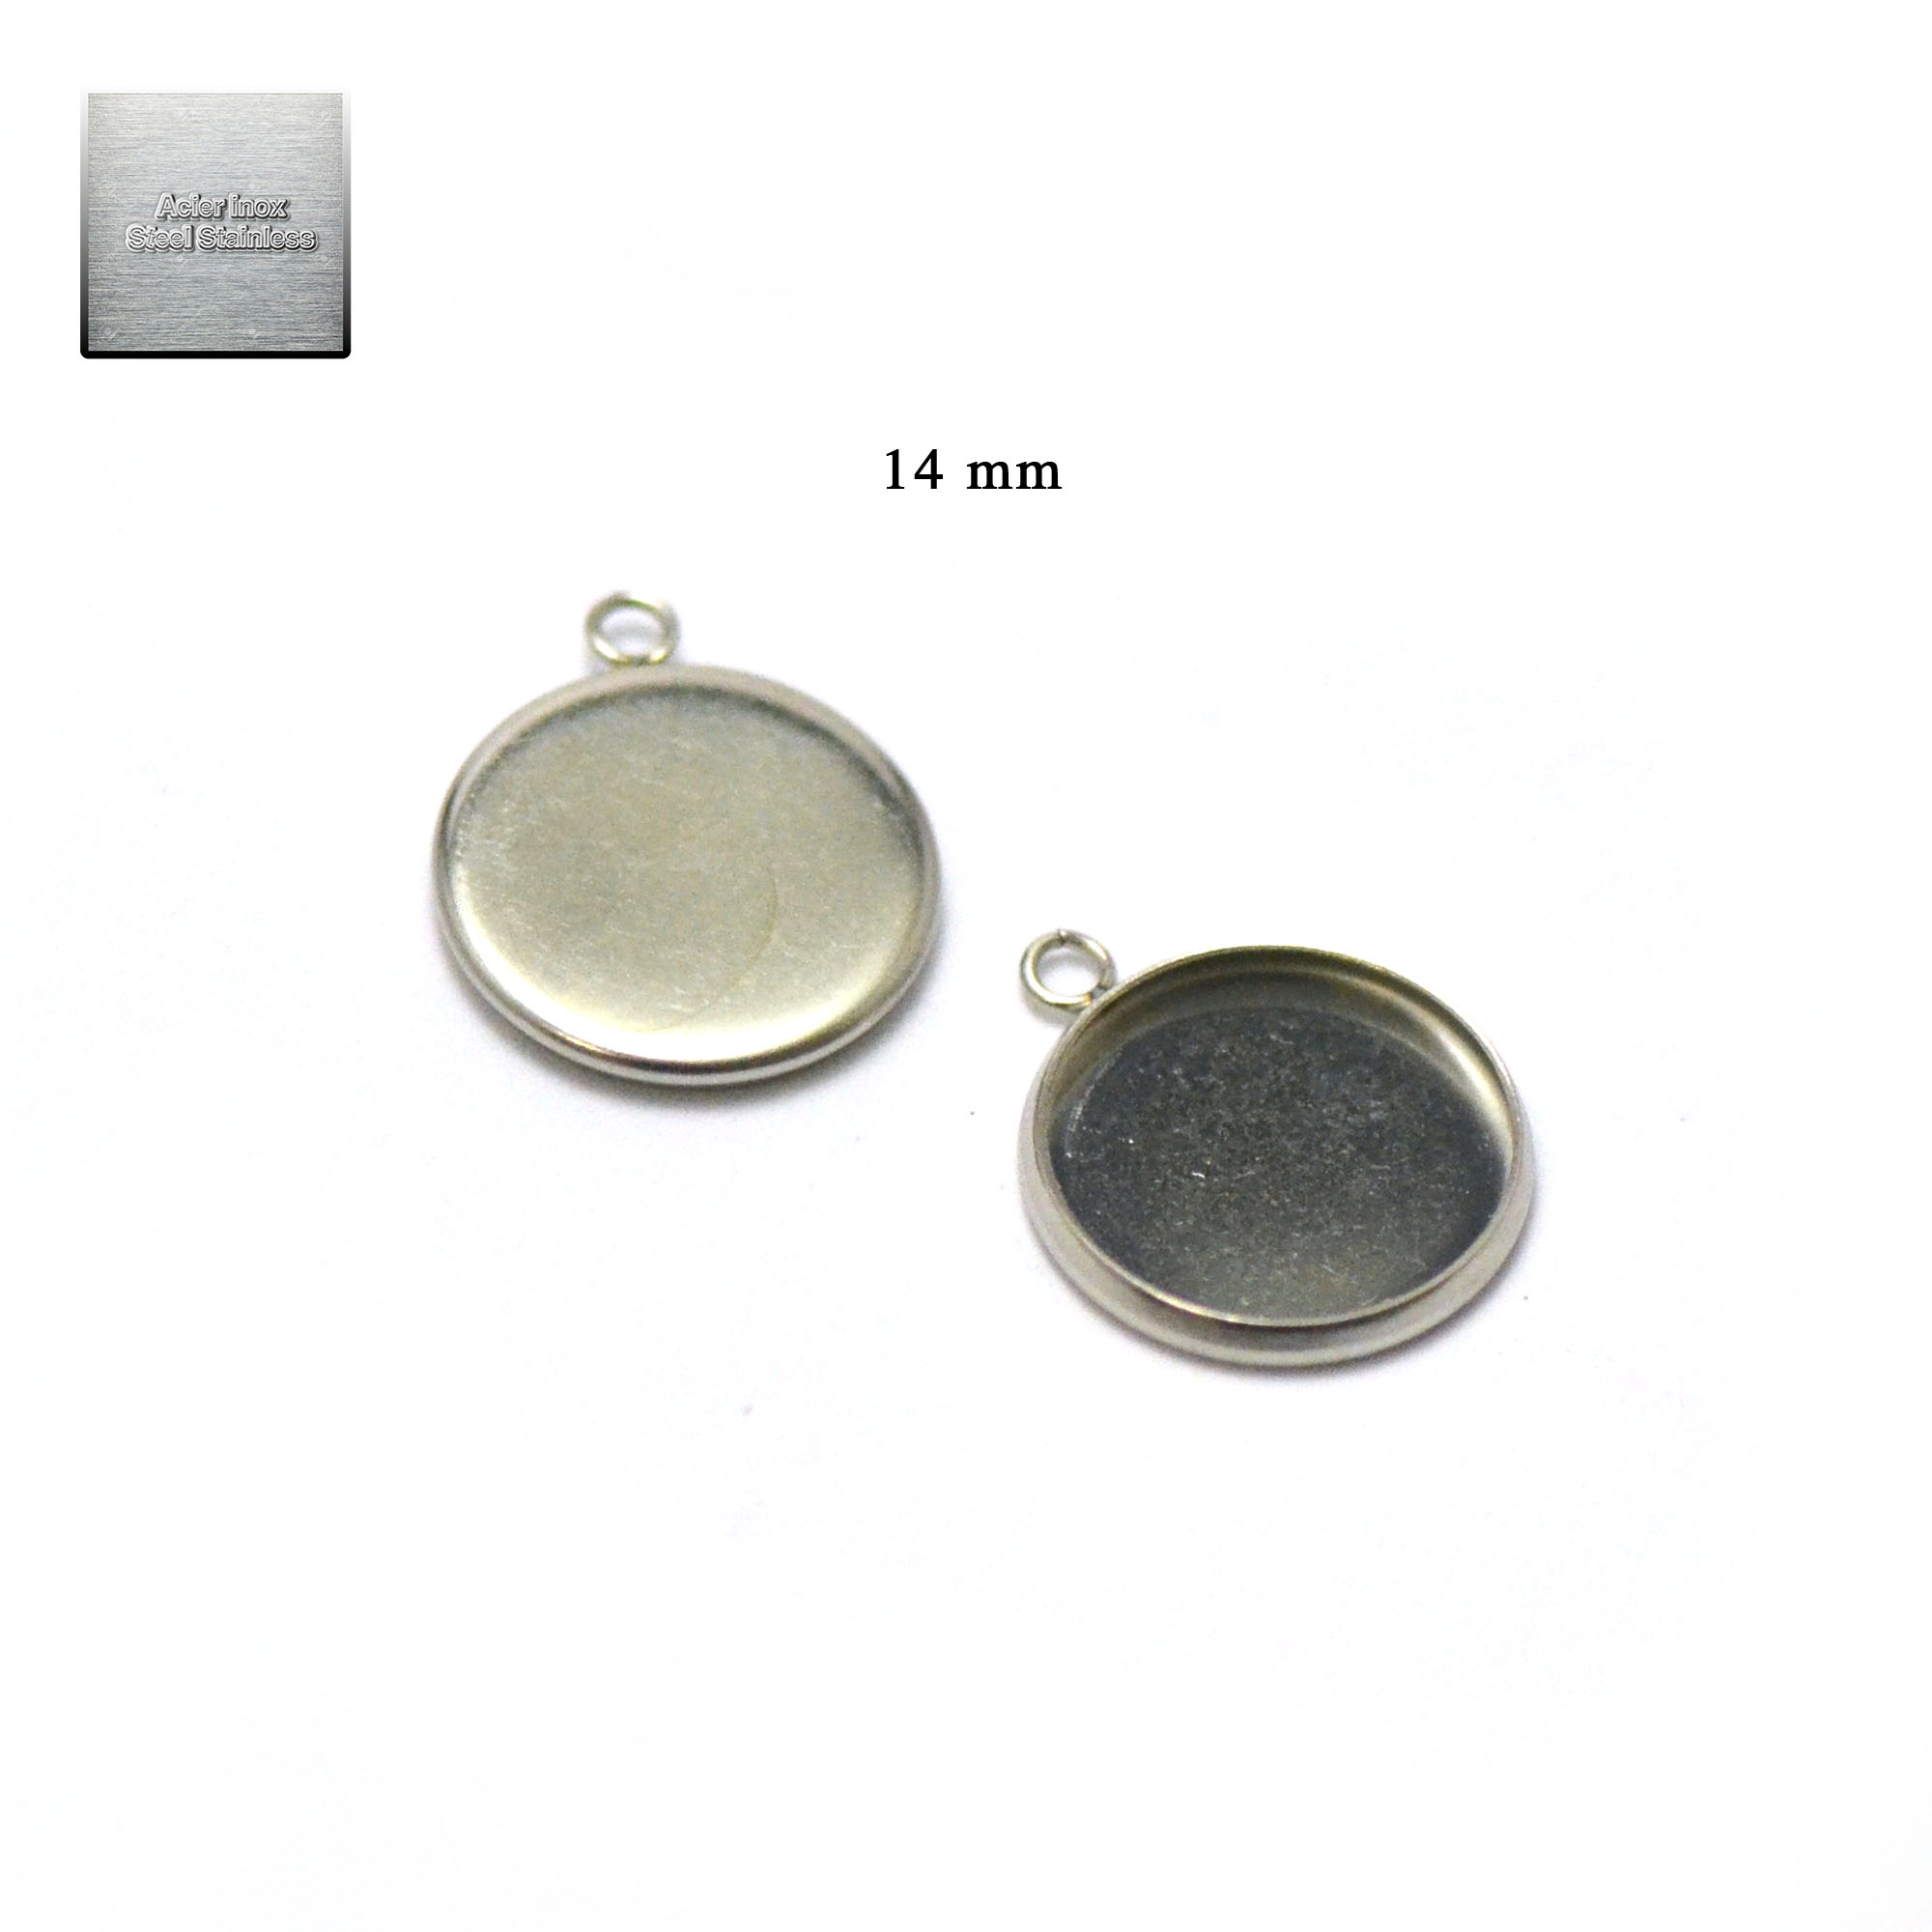 Acier inox: 10 pendentif support cabochon 14 mm, steel stainless